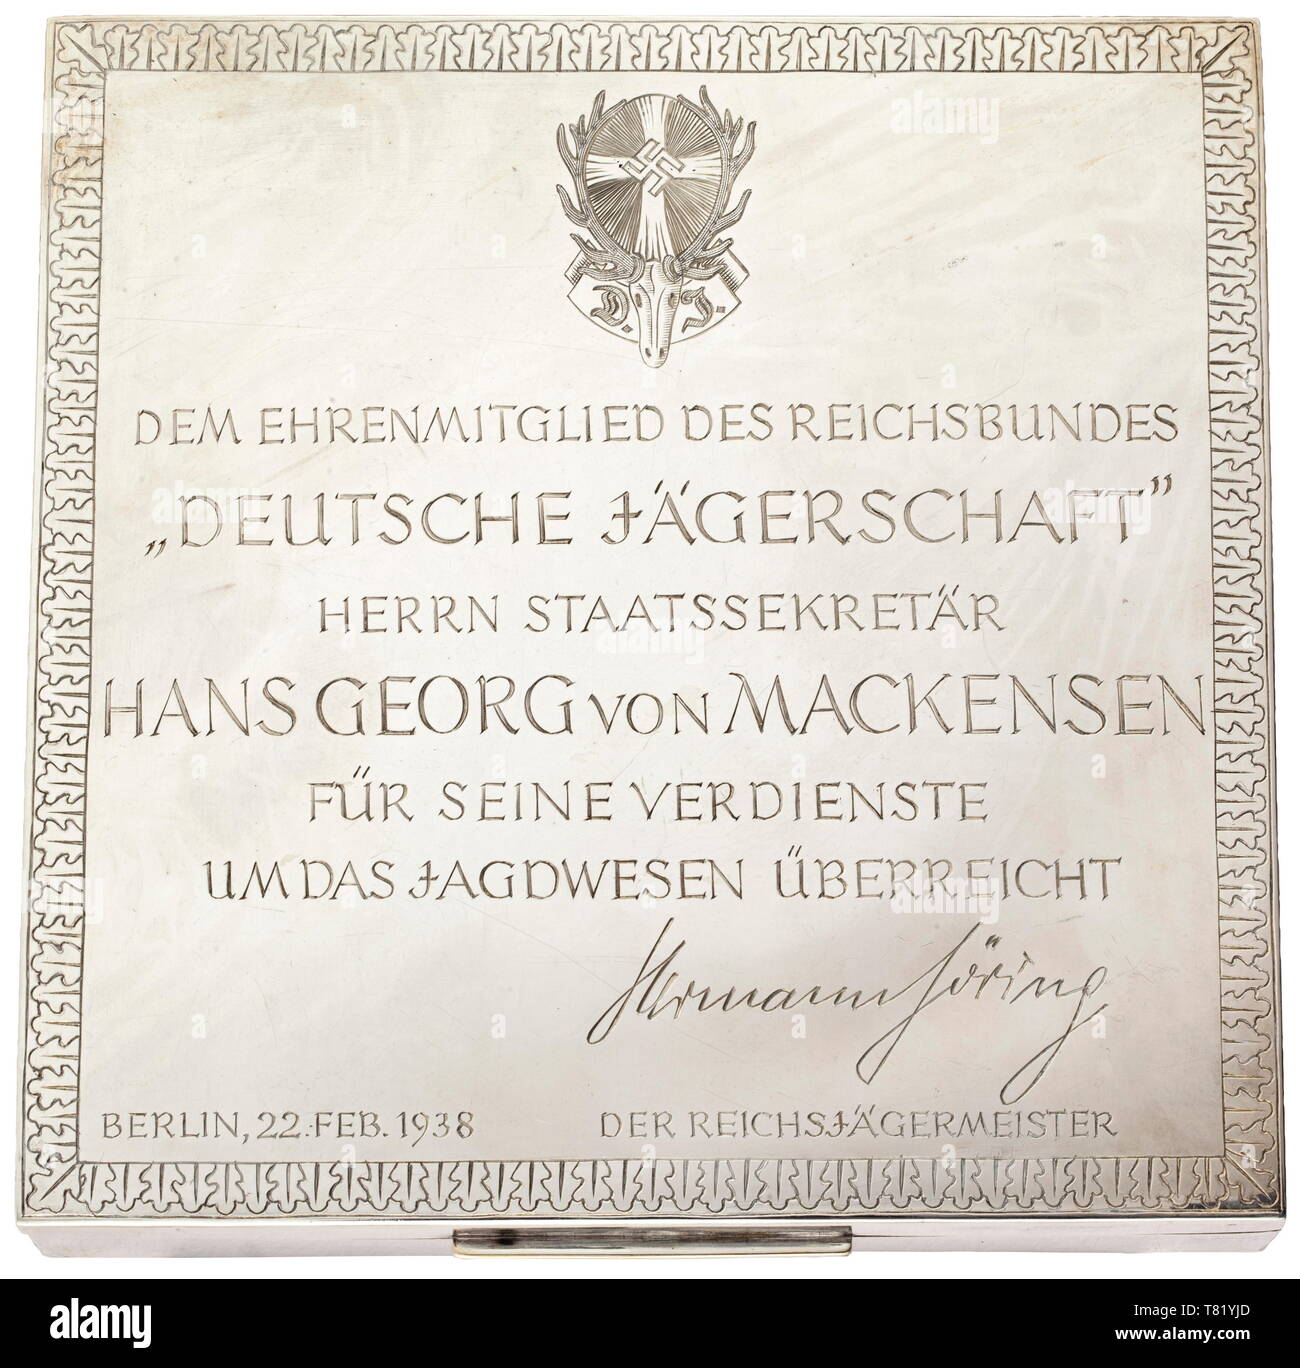 Hermann Göring - Hans Georg von Mackensen. A silver cigaret- te casket presented by Göring as Reich Master Huntsman to Mackensen for his services to hunting, the cover with an engraved dedication surmounting the emblem of the Deutsche Jägerschaft (German Hunting Association) 'Dem Ehrenmitglied des Reichsbundes der Deutschen Jägerschaft - Herrn Staatssekretär Hans Georg von Mackensen - für seine Verdienste um das Jagdwesen überreicht - Hermann Göring - Berlin 22. Februar 1938 - Der Reichsjägermeister' (Presented to Honorary Member of the Reich League of the German Hunting As, Editorial-Use-Only Stock Photo